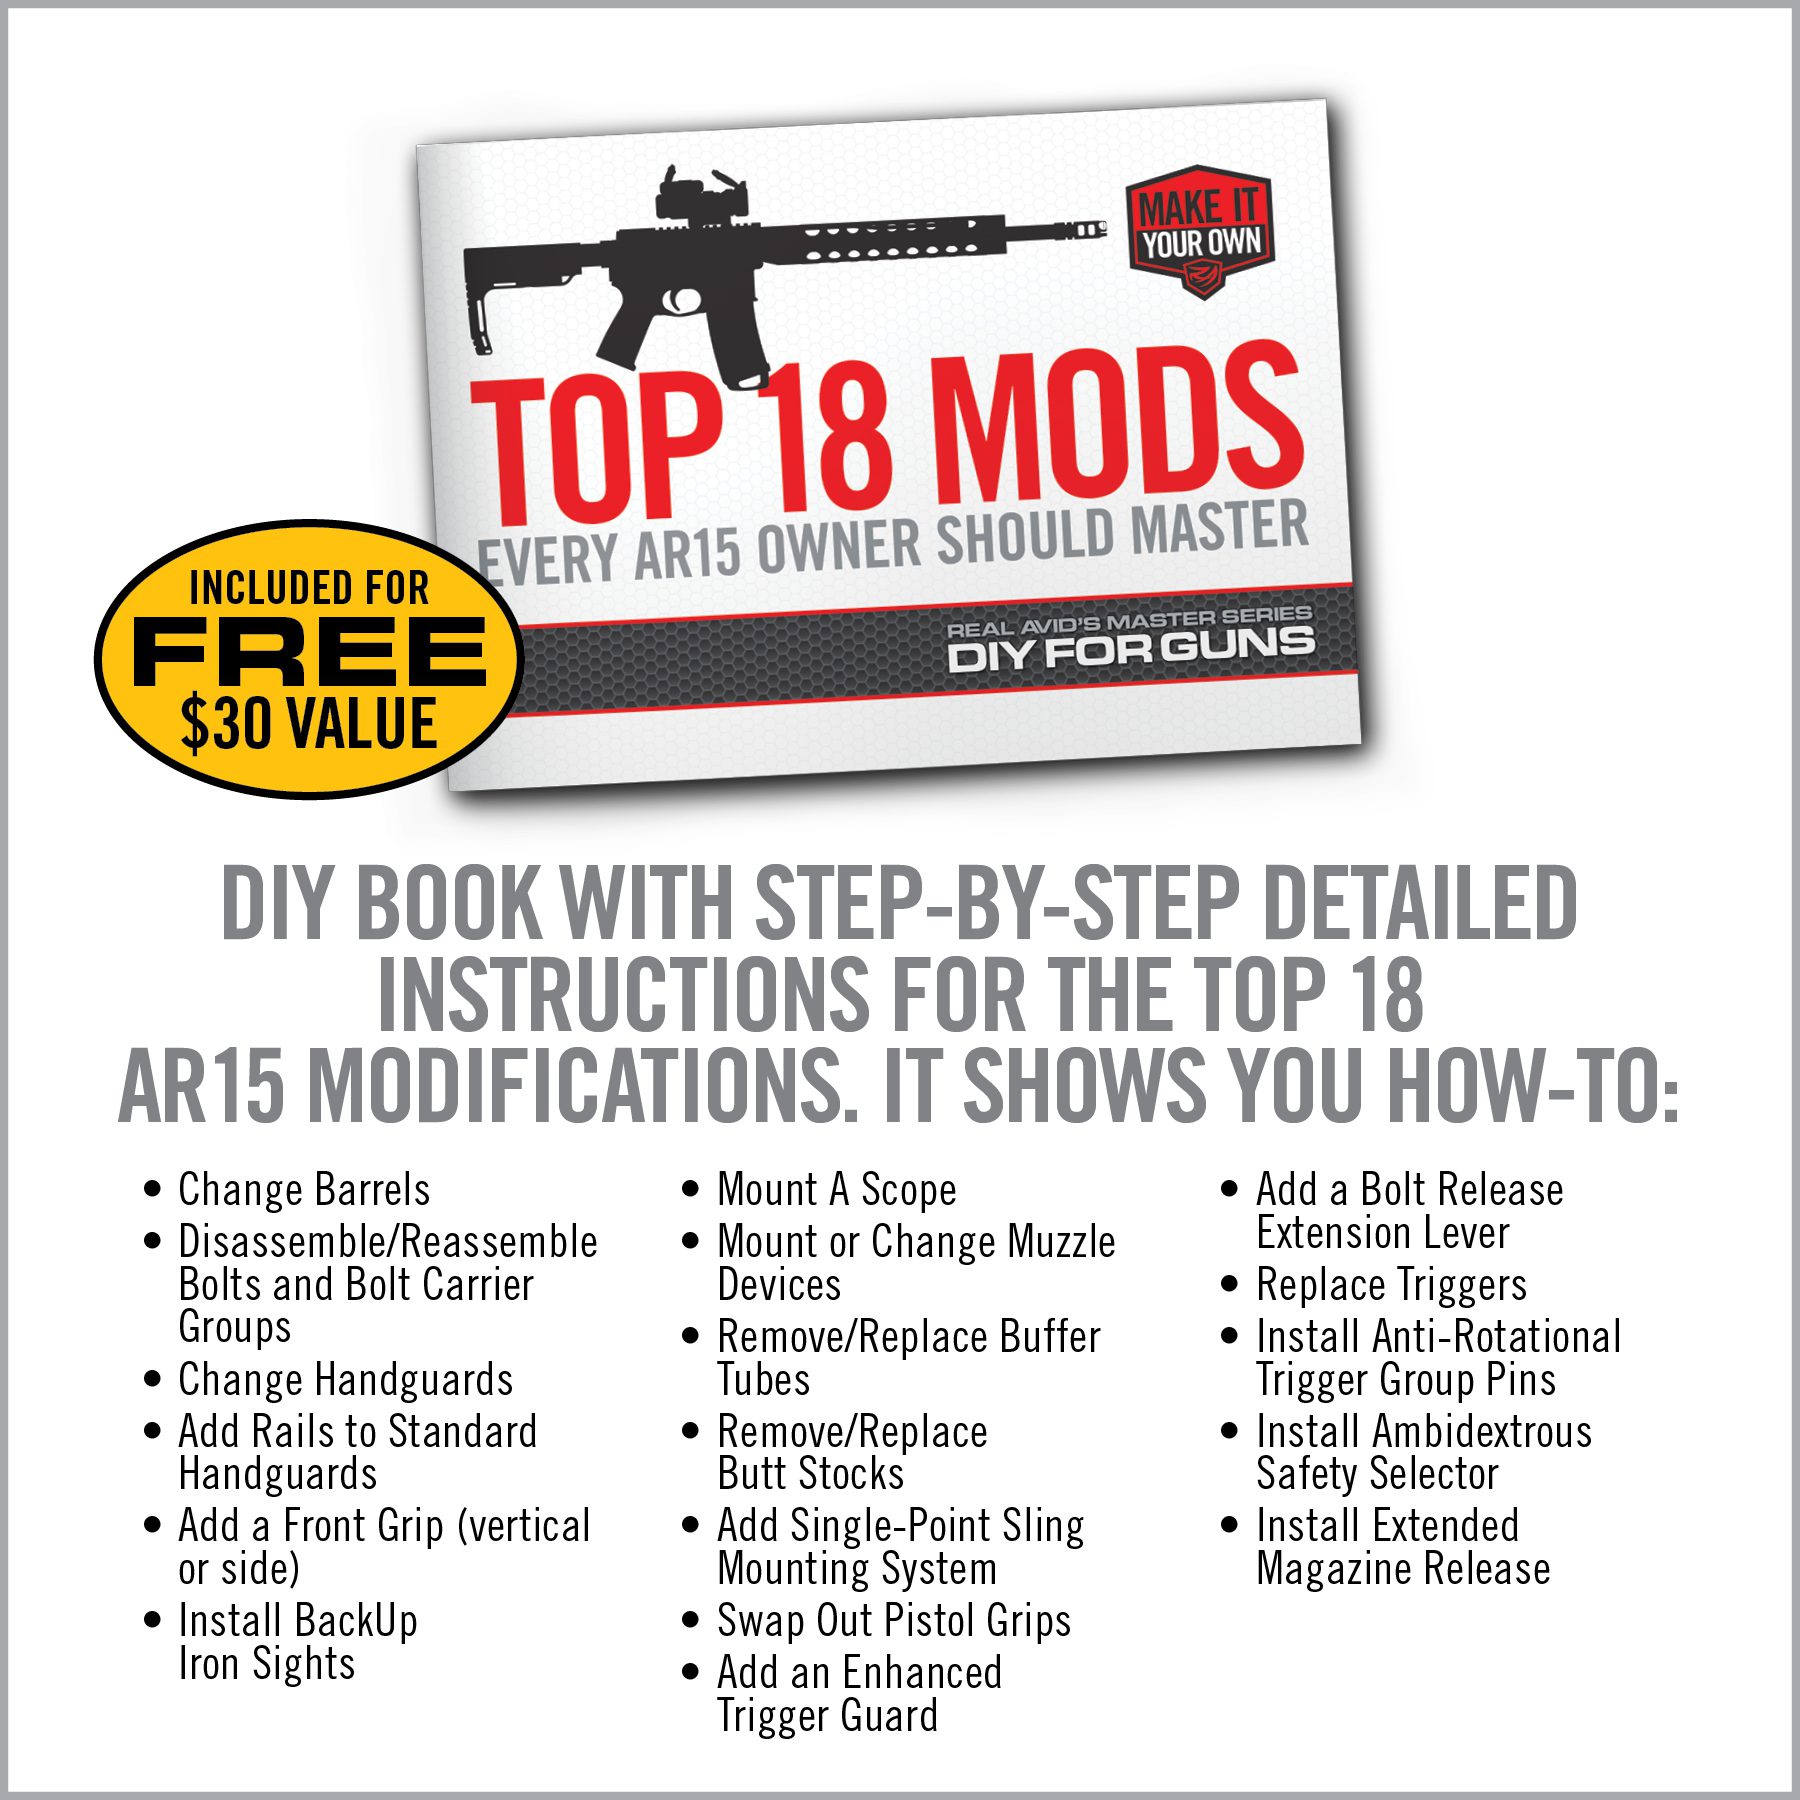 a flyer for the top 18 mods